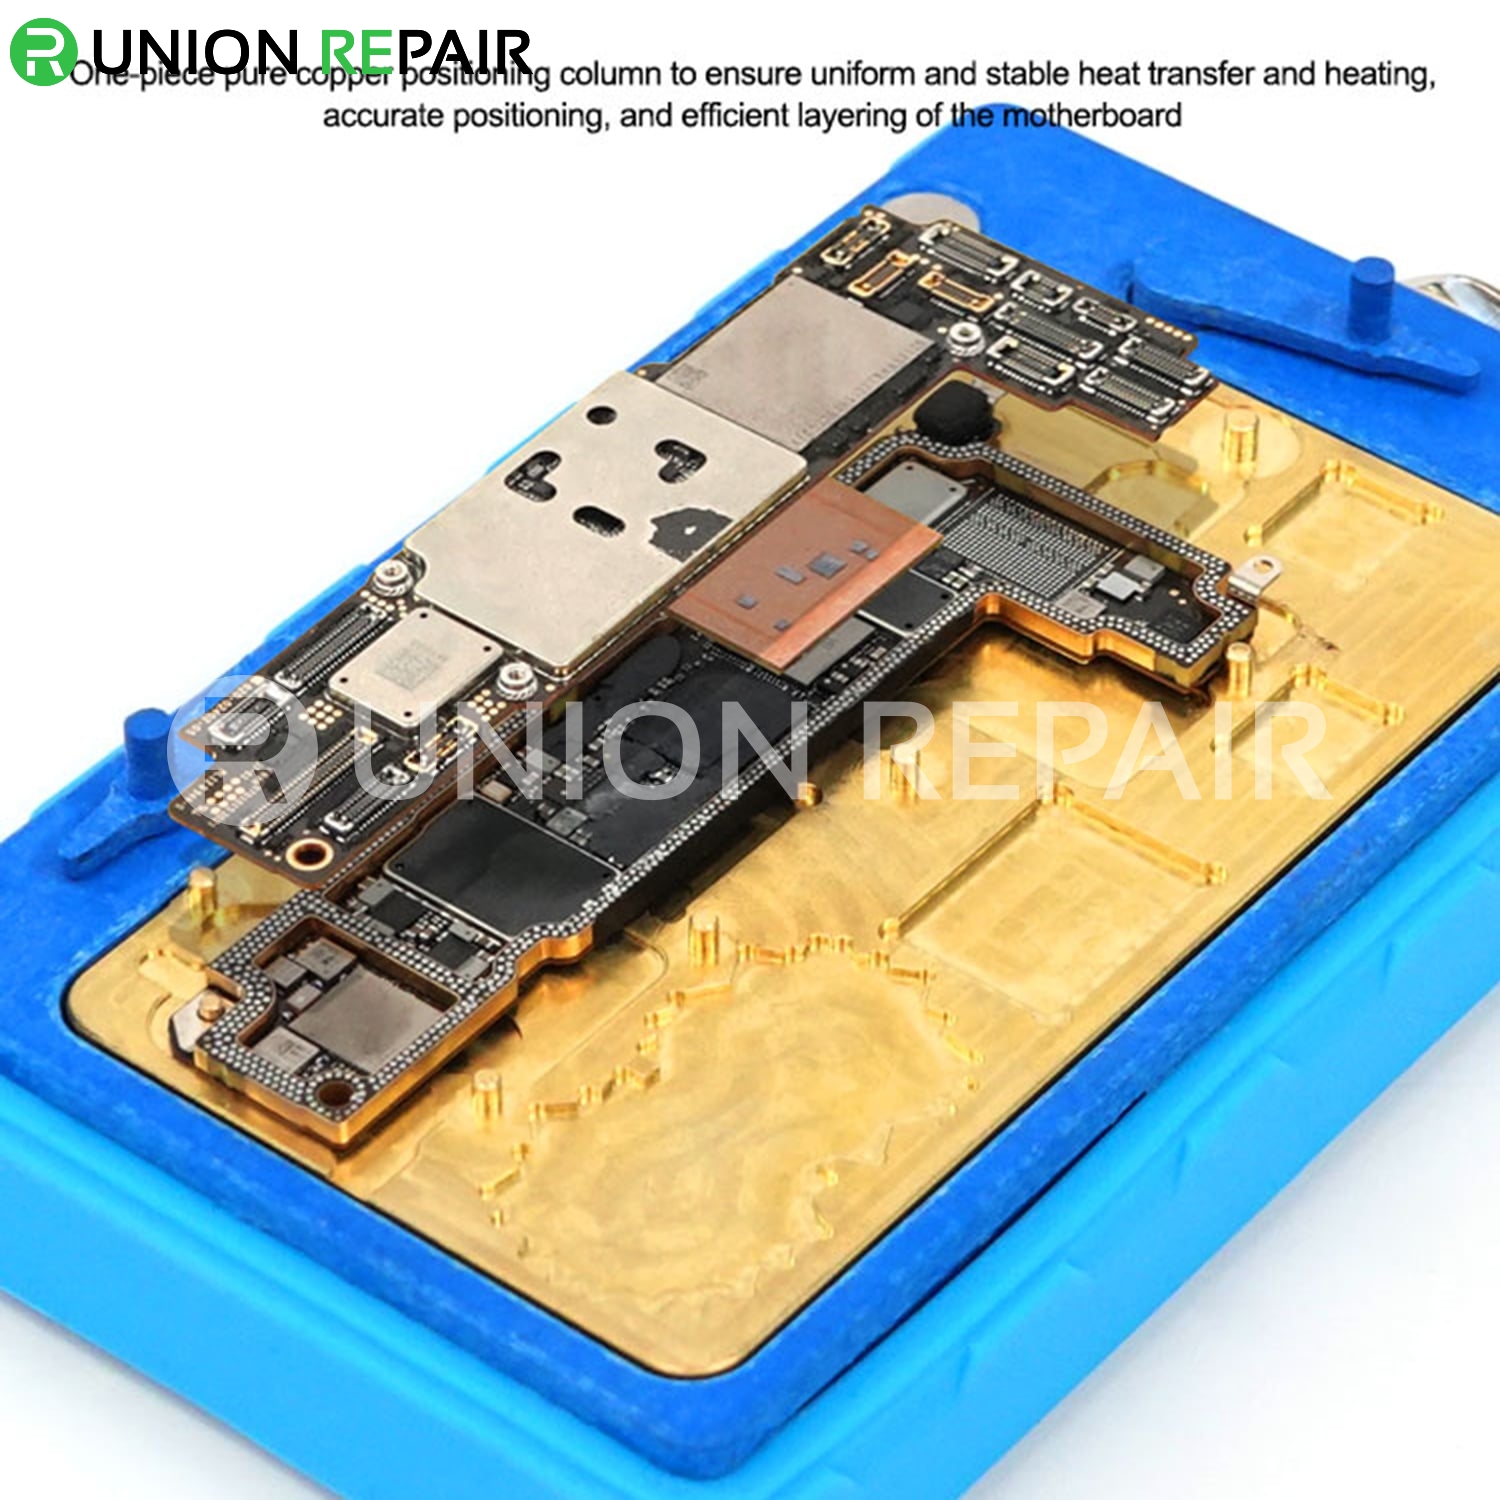 SS-T12A Mainboard Preheater for iPhone X-13ProMax, Condition: T12A-N13